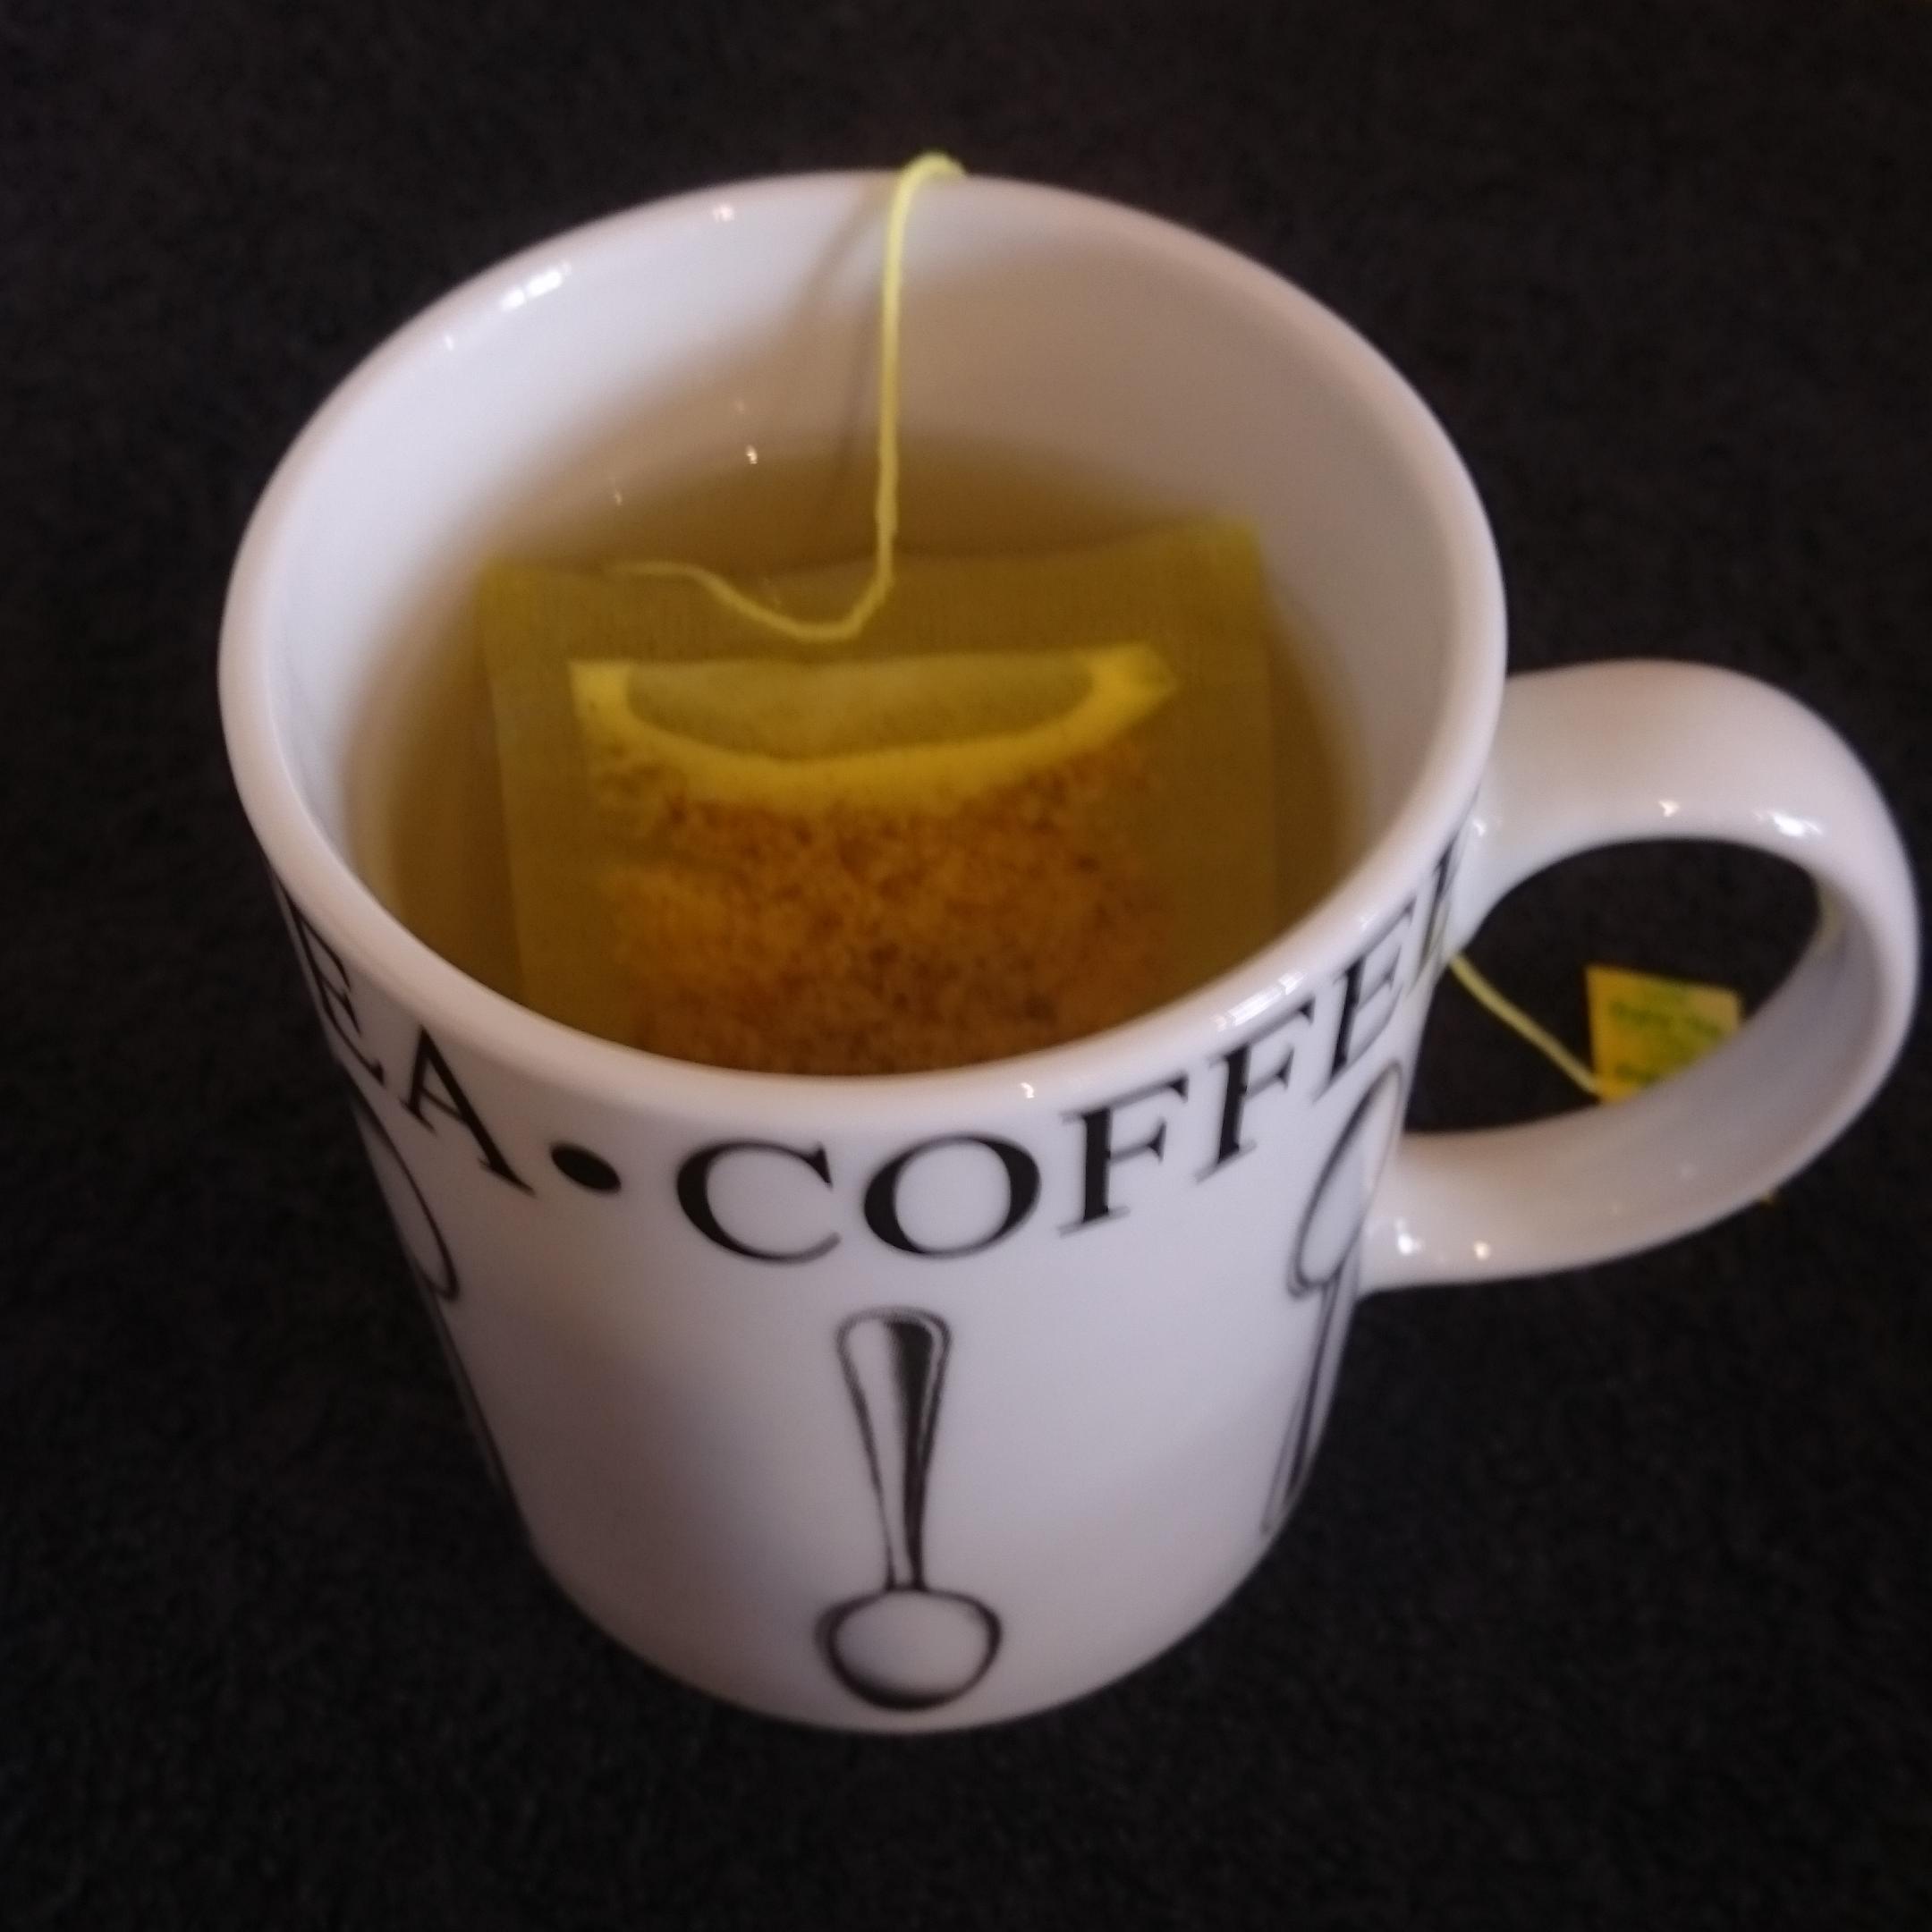 Natur Boutique's Coconut Tea with Ginger and Turmeric teabag in
cup